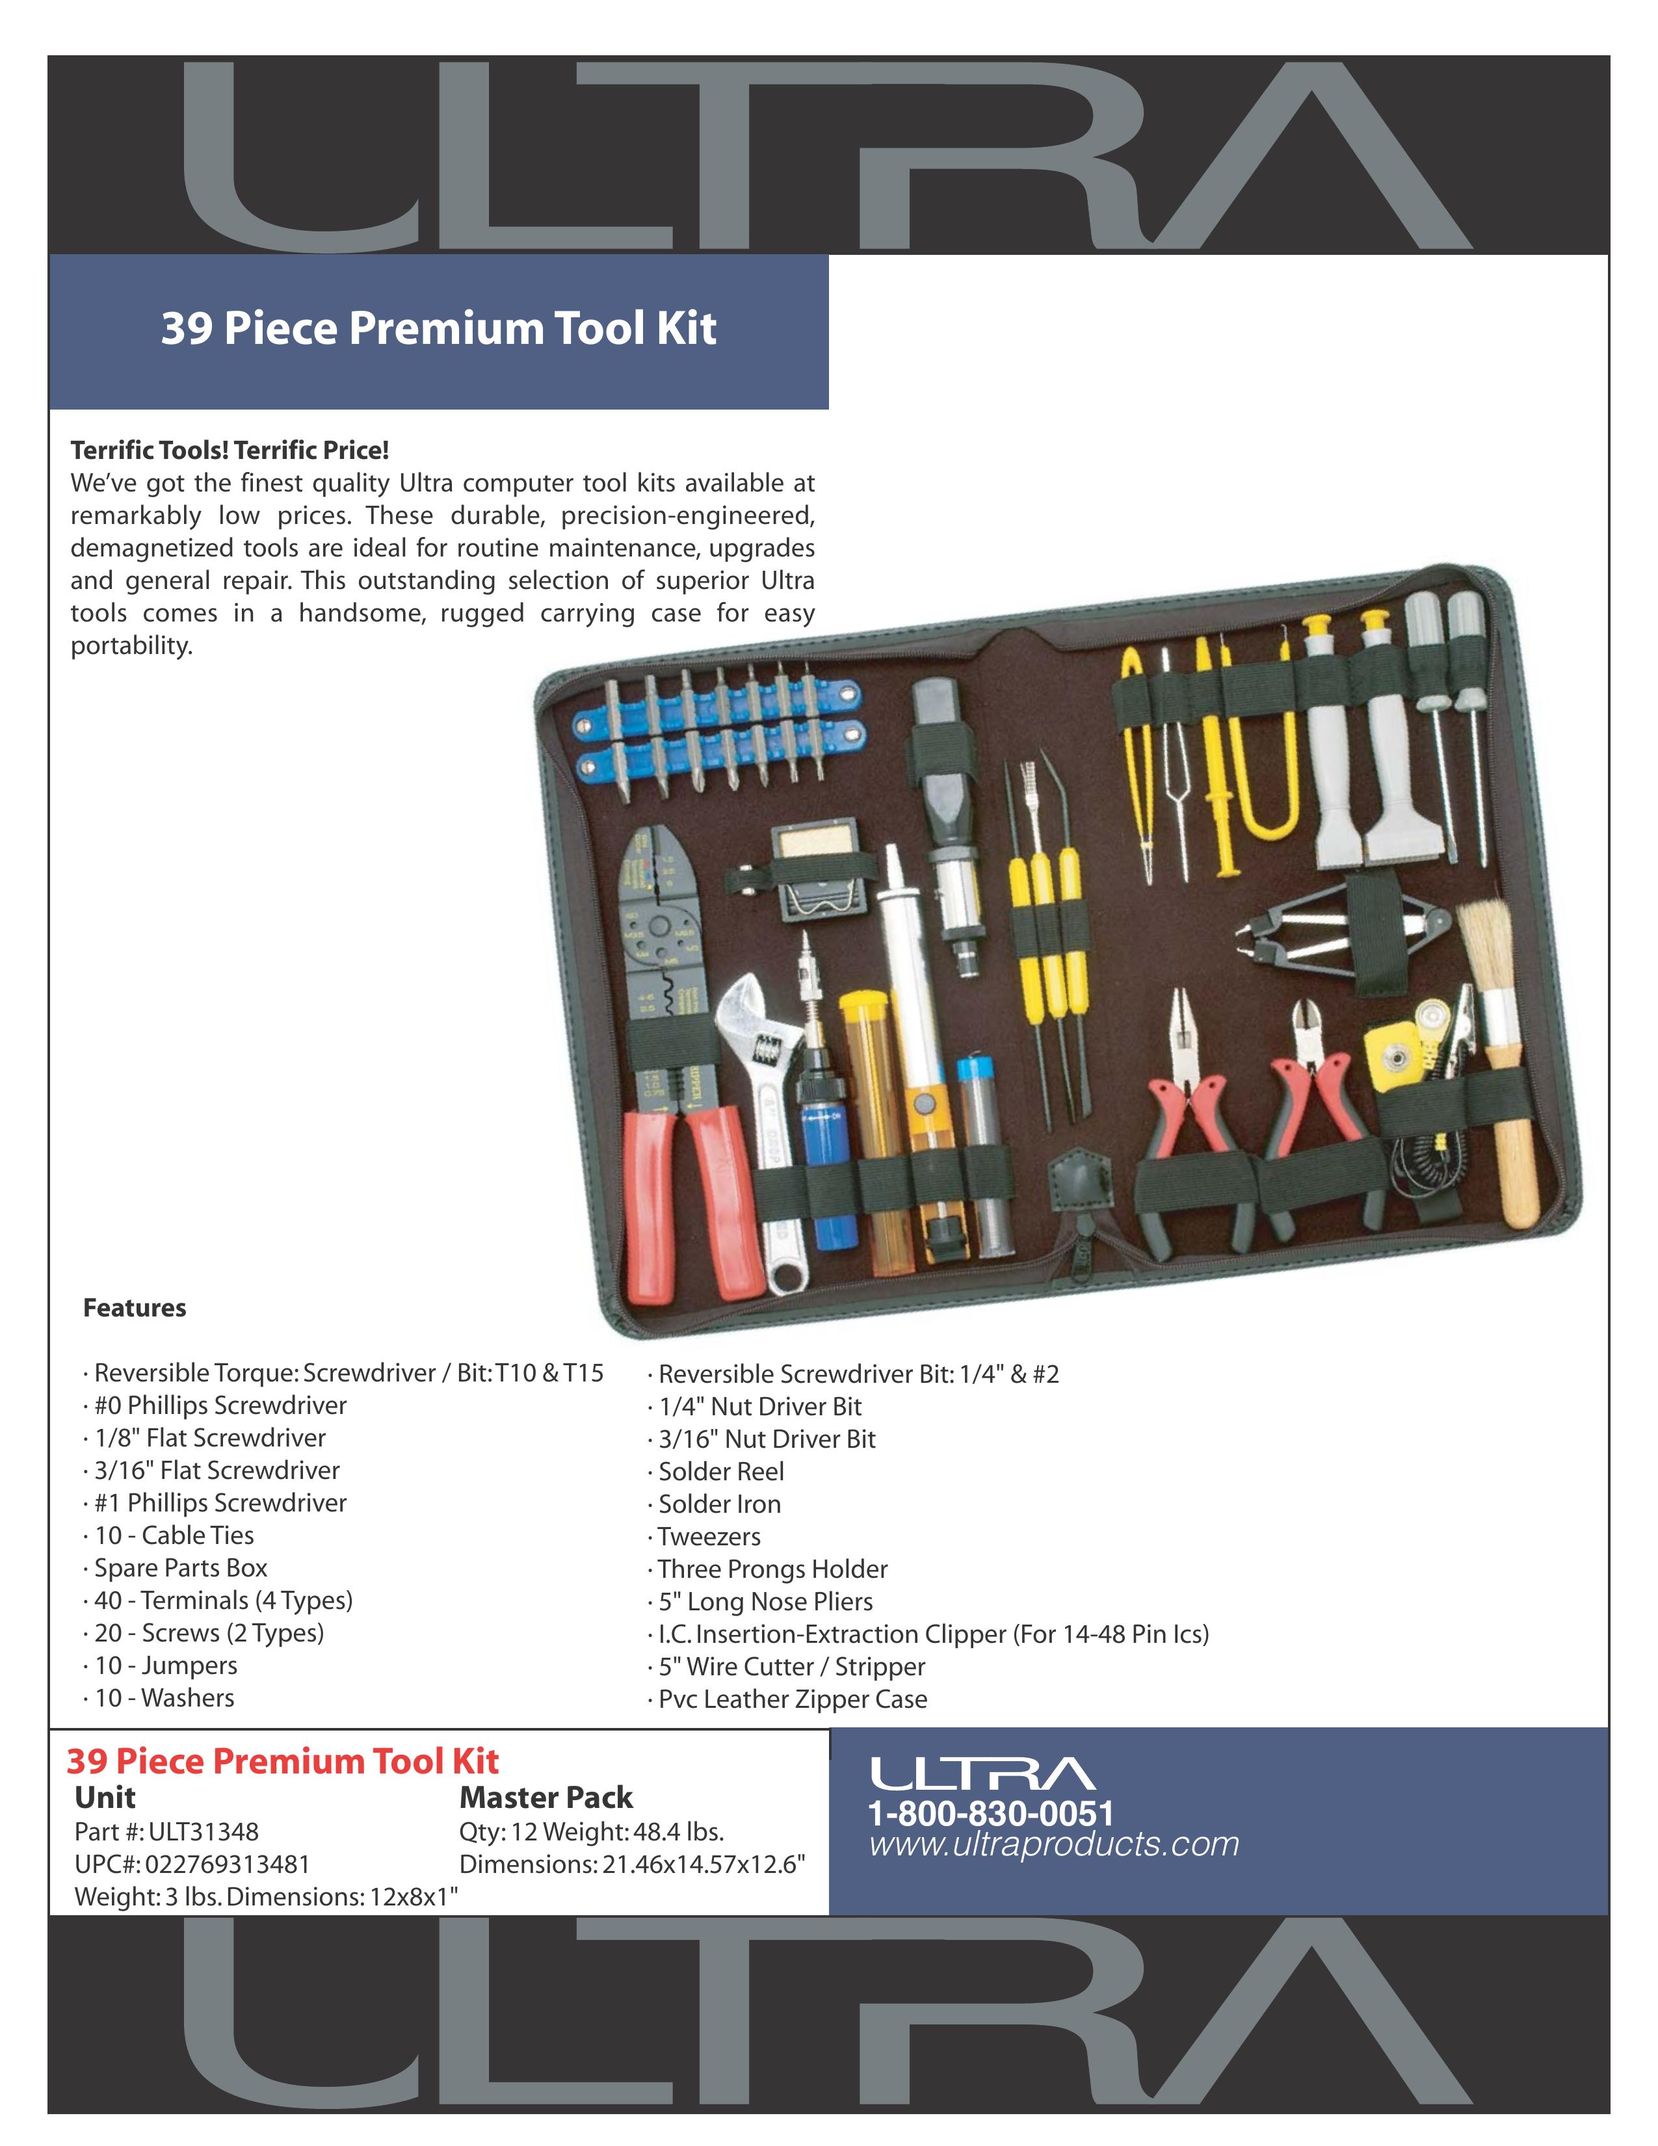 Ultra Products ULT31348 Personal Computer User Manual